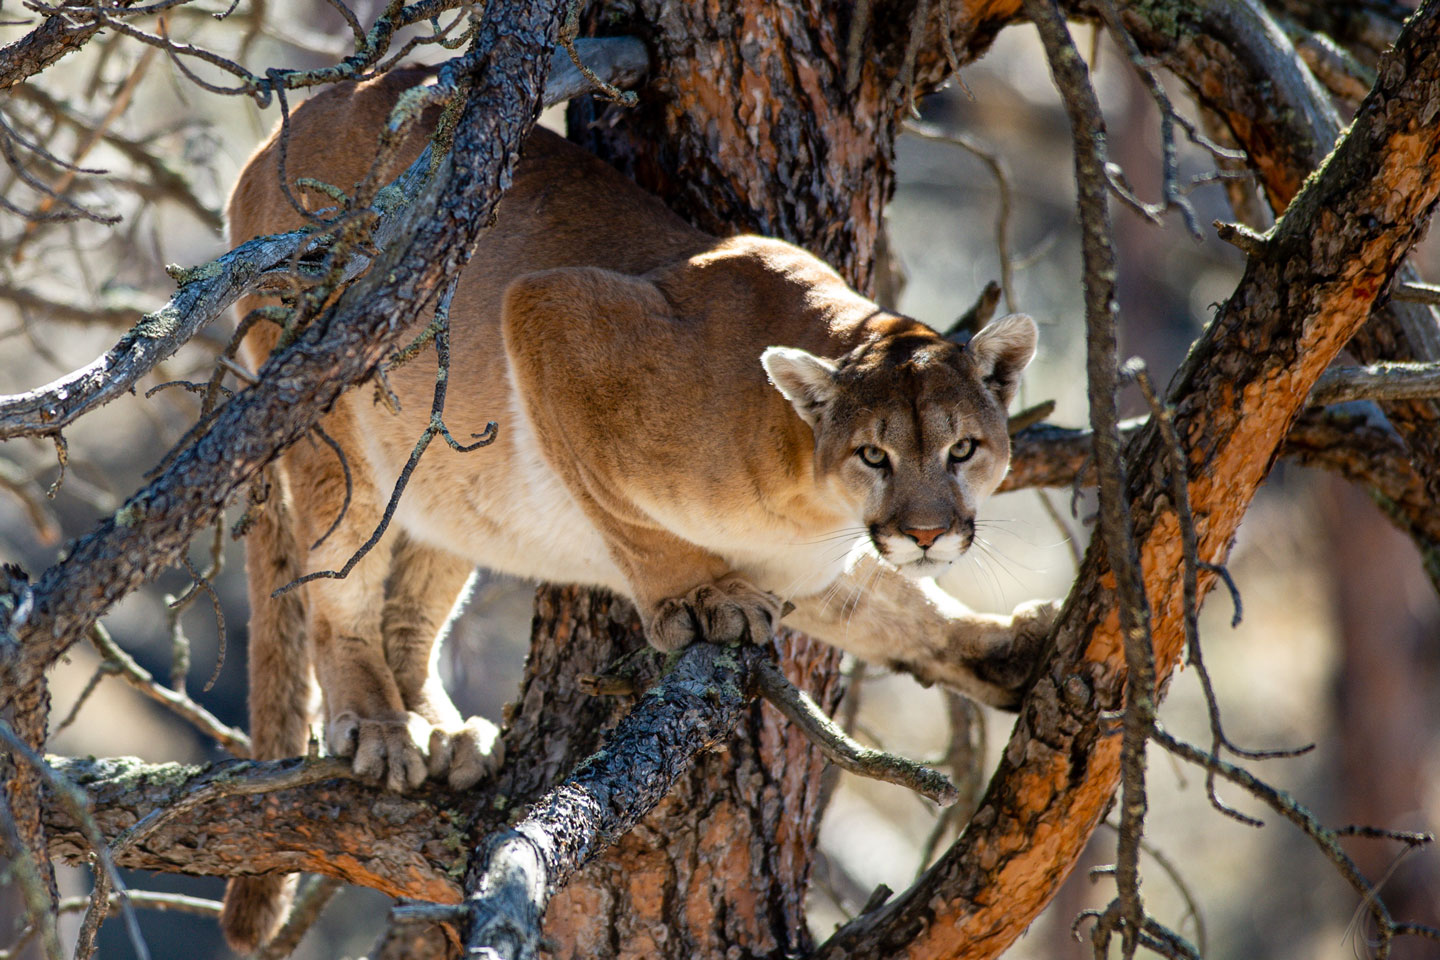 Read More: Mountain Lions